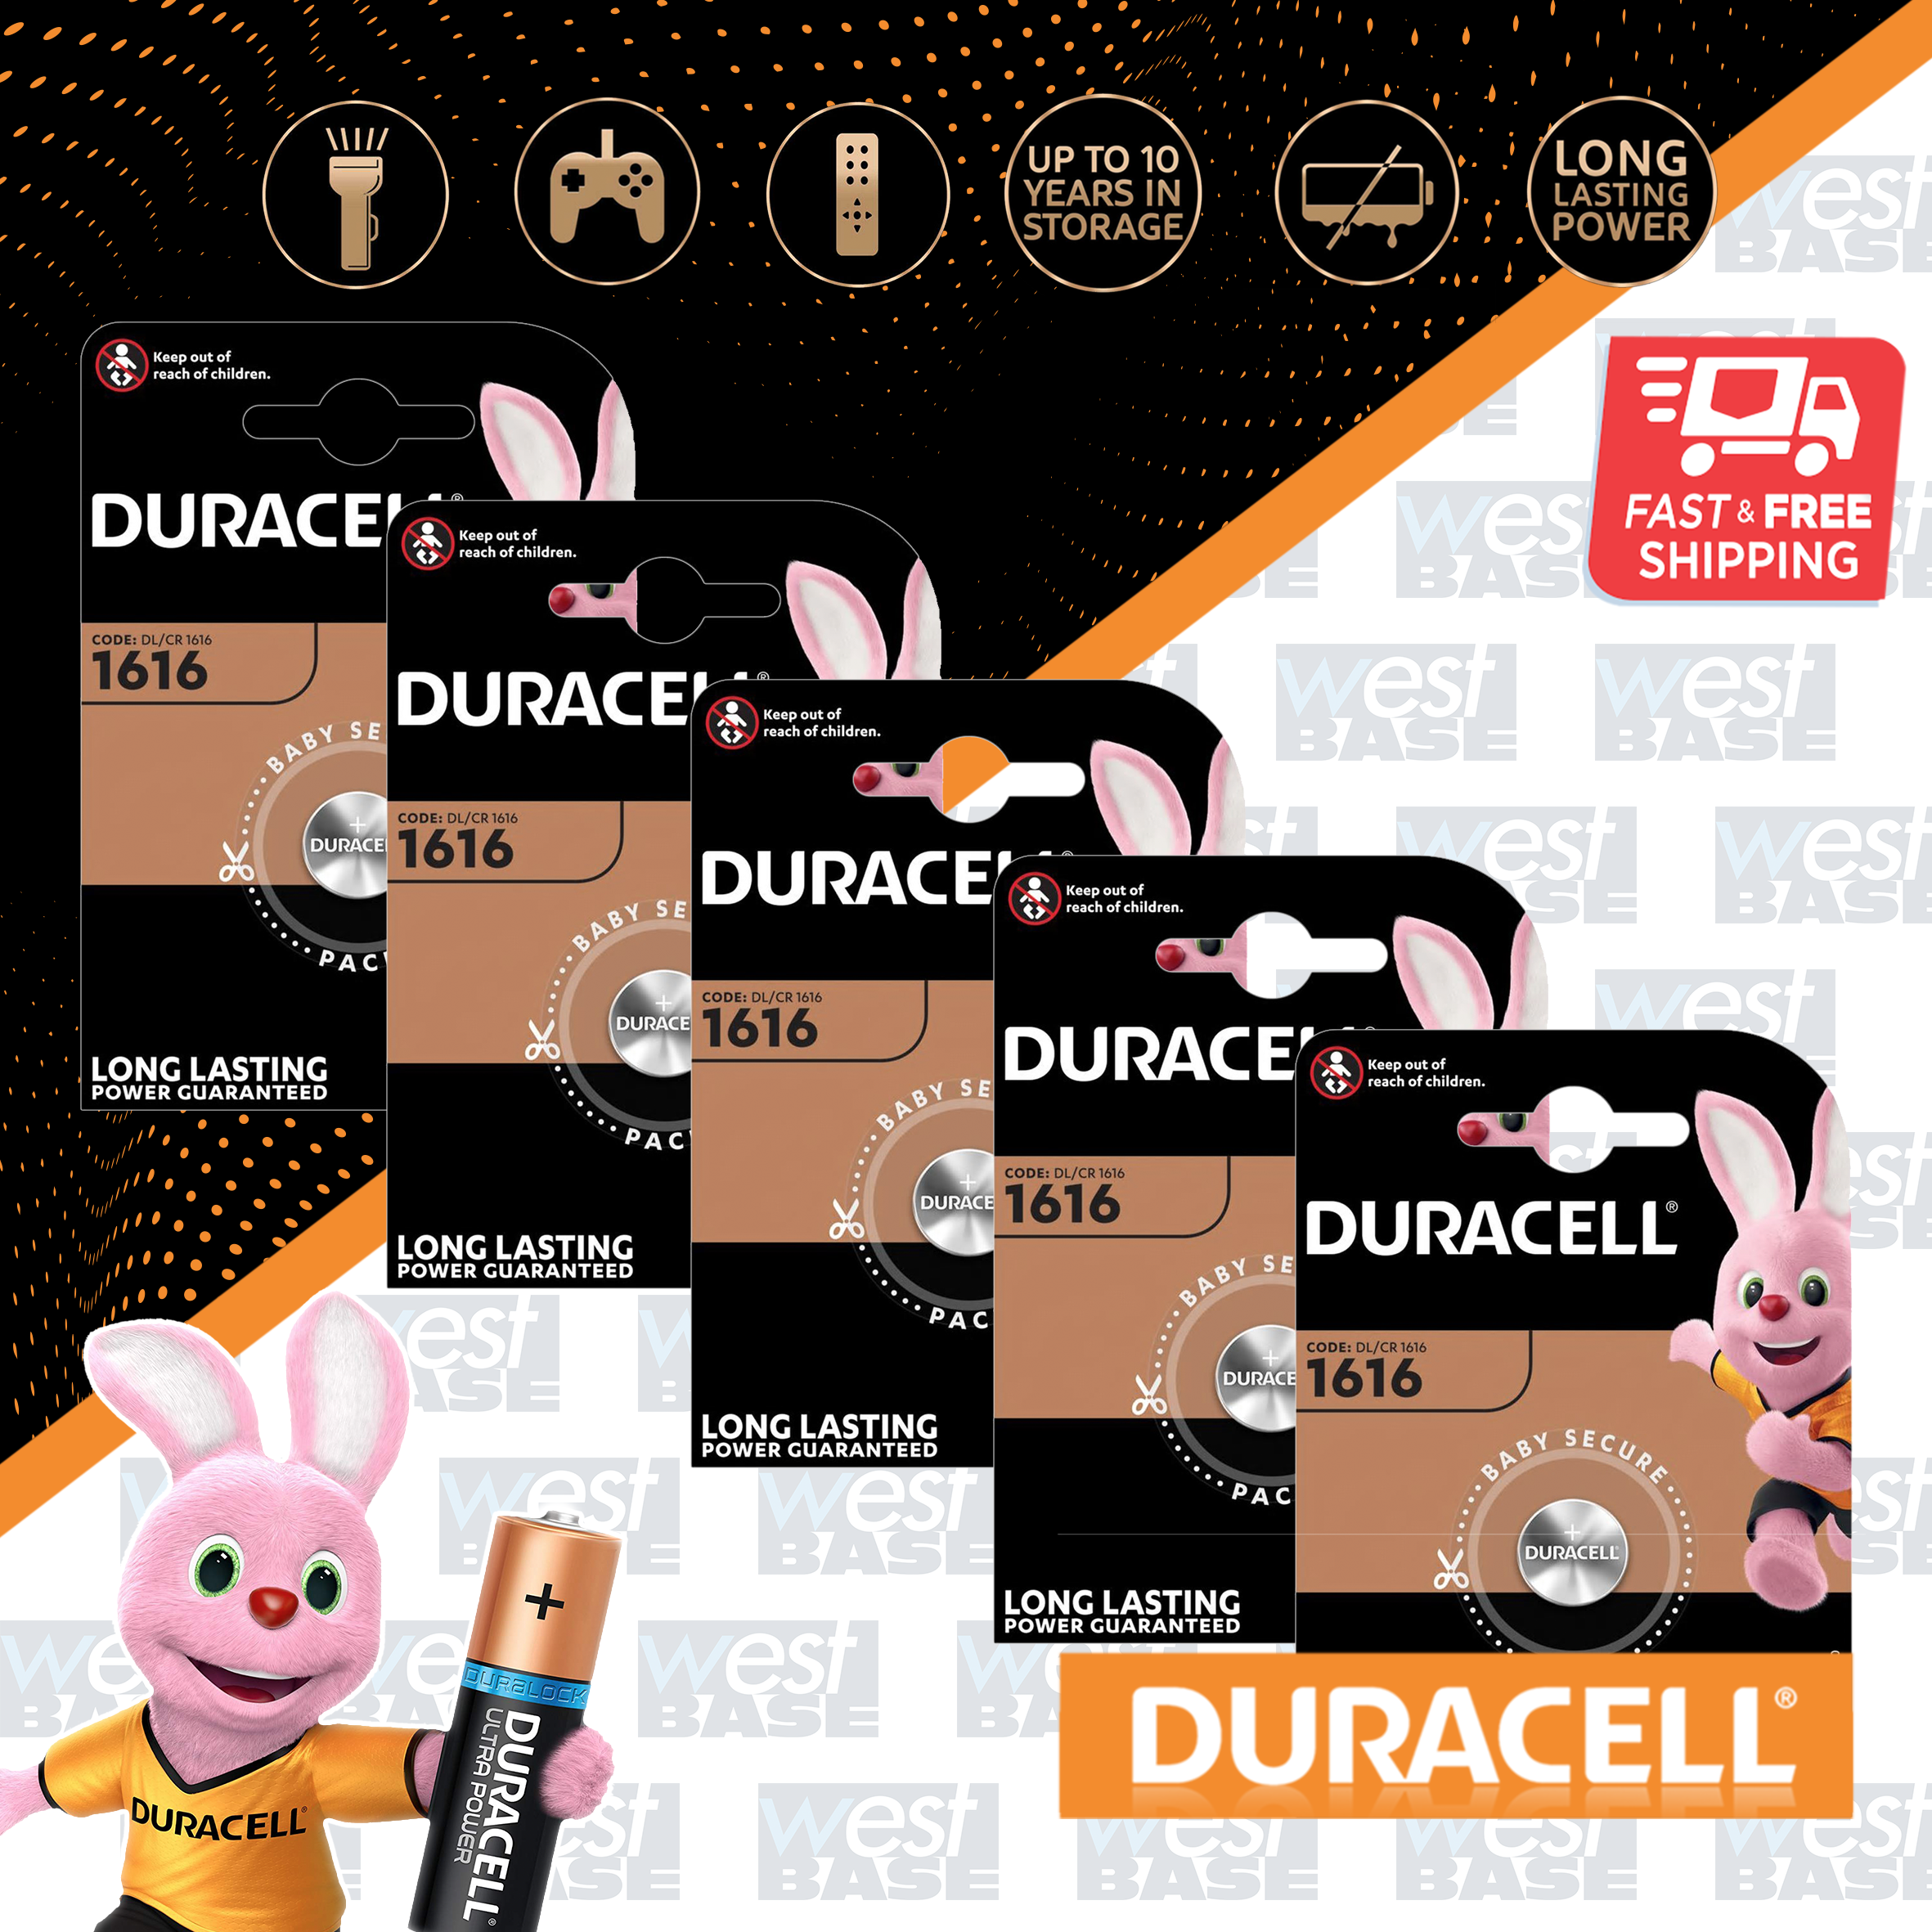 cr2016 battery equivalent duracell